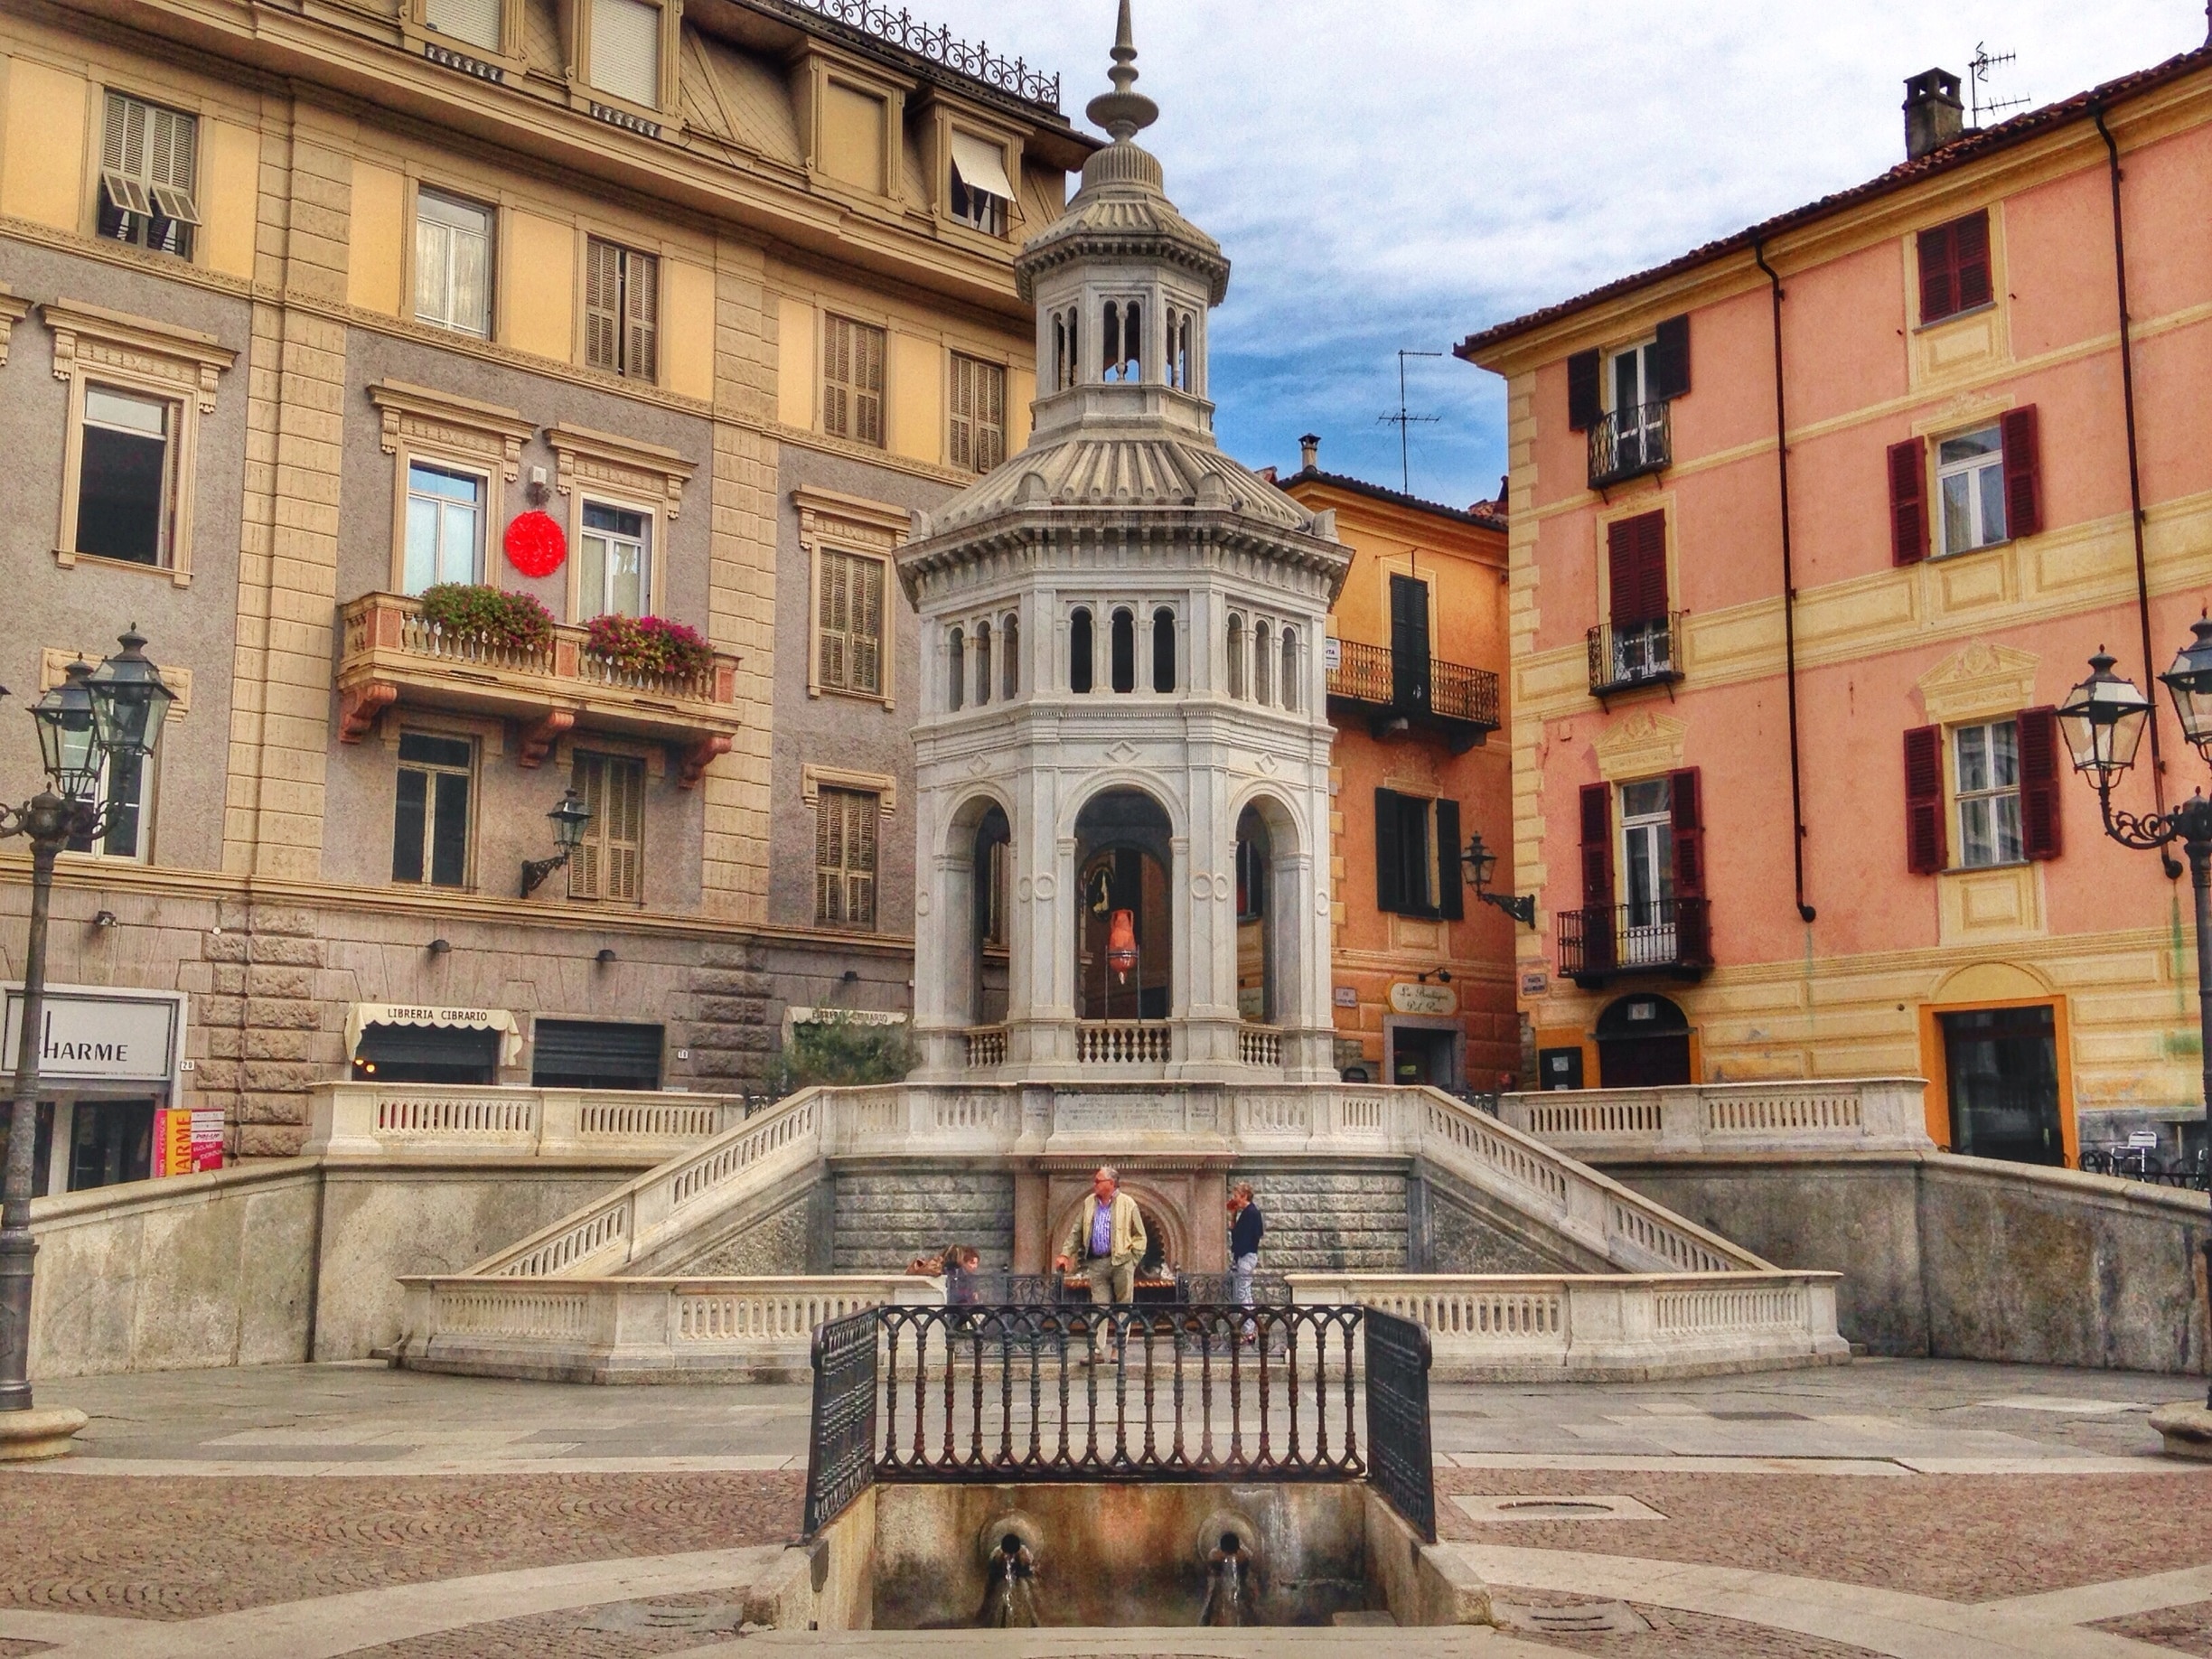 La Bollente spring in Acqui Terme, located in the center of town and a spot where water reaches 75 degrees Celsius. Locals drink from the water and use it for other healing purposes. You can find great spa products in this region because of their natural mineral hot springs. 